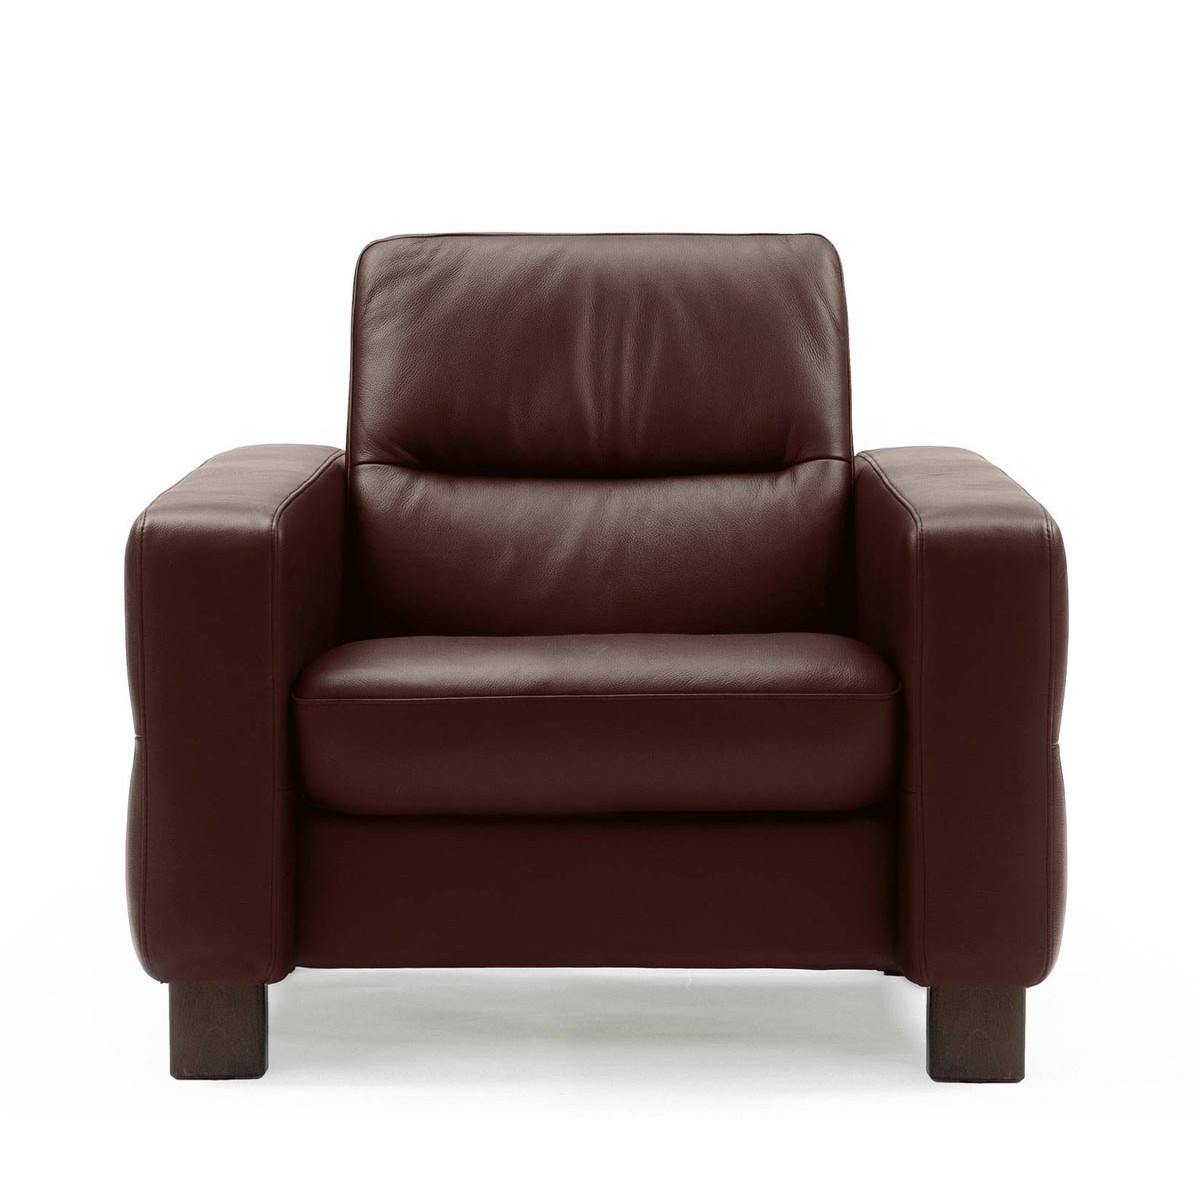 Stressless wave low back chair from 1 795 00 by